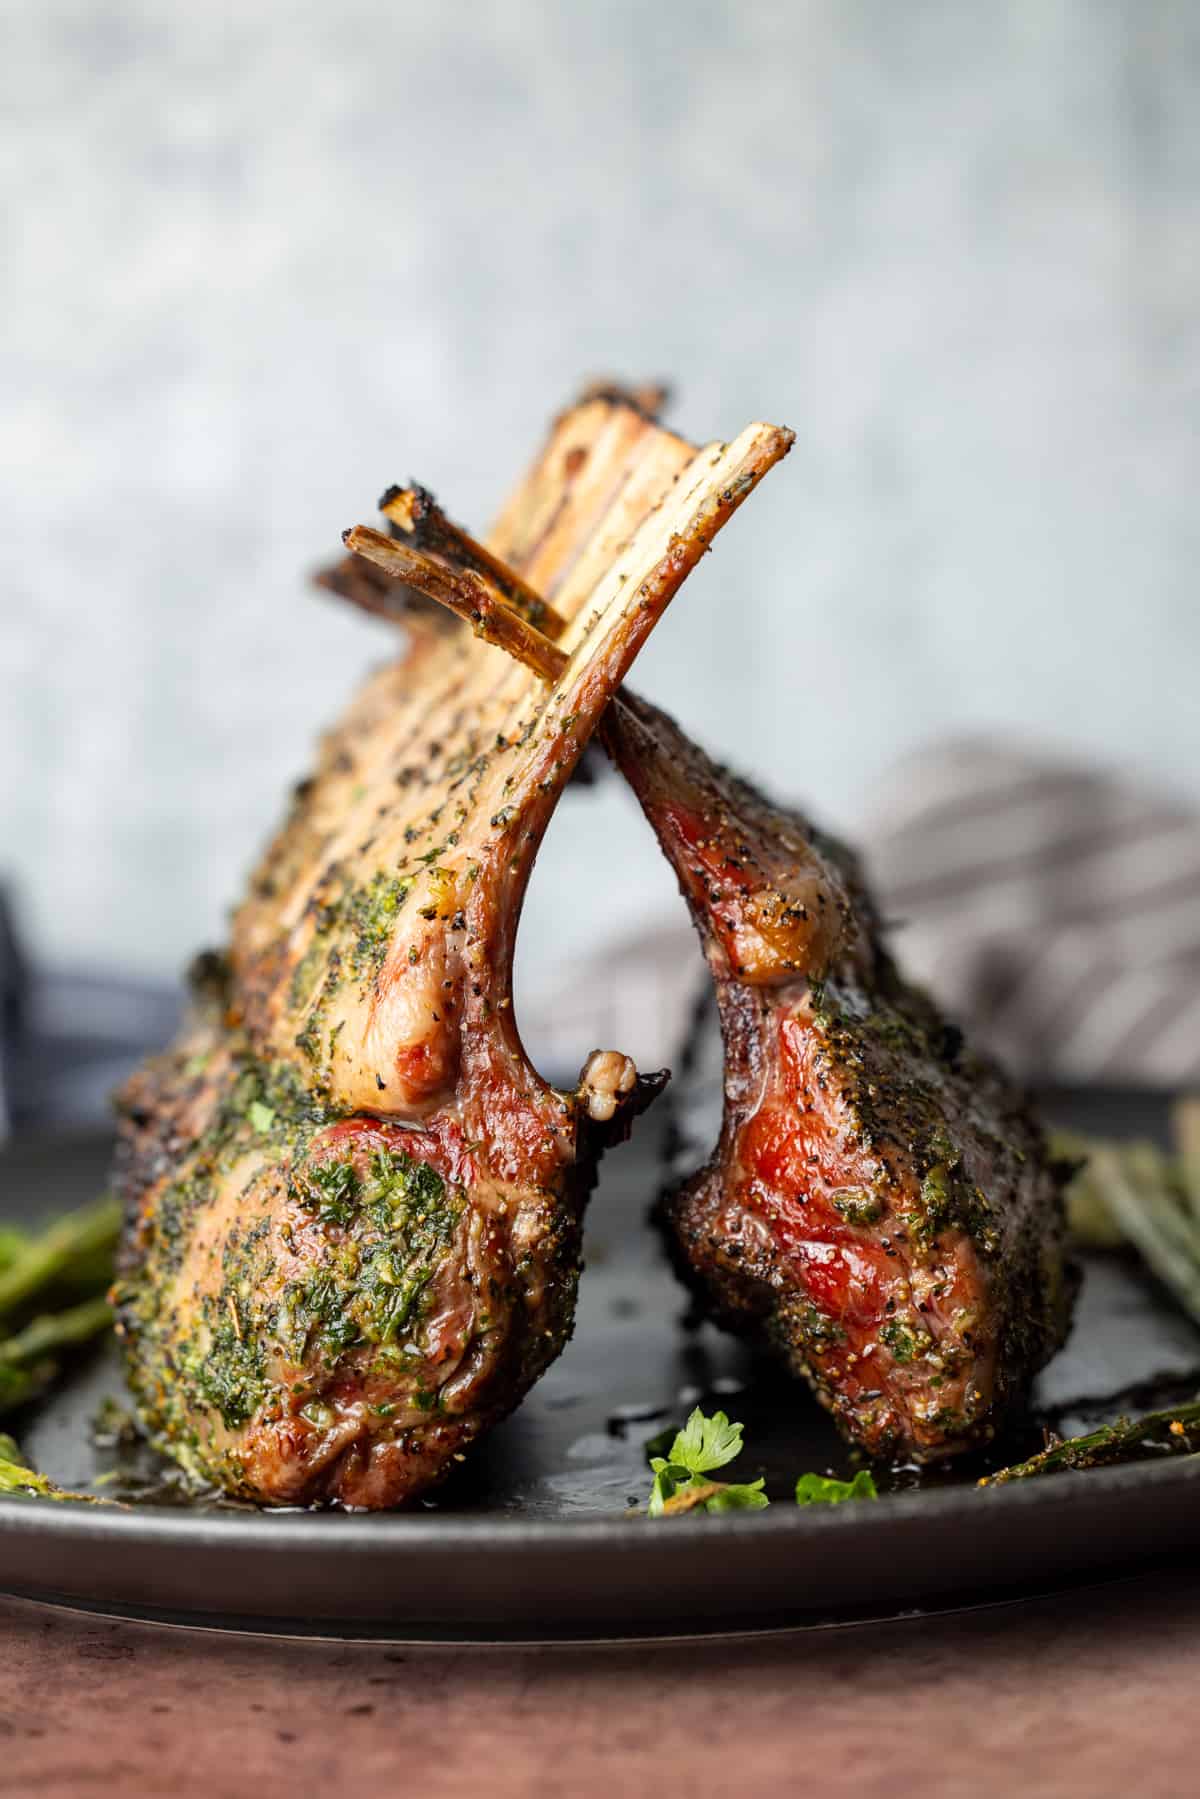 Two racks of lamb cooked on top of a black plate with white background.